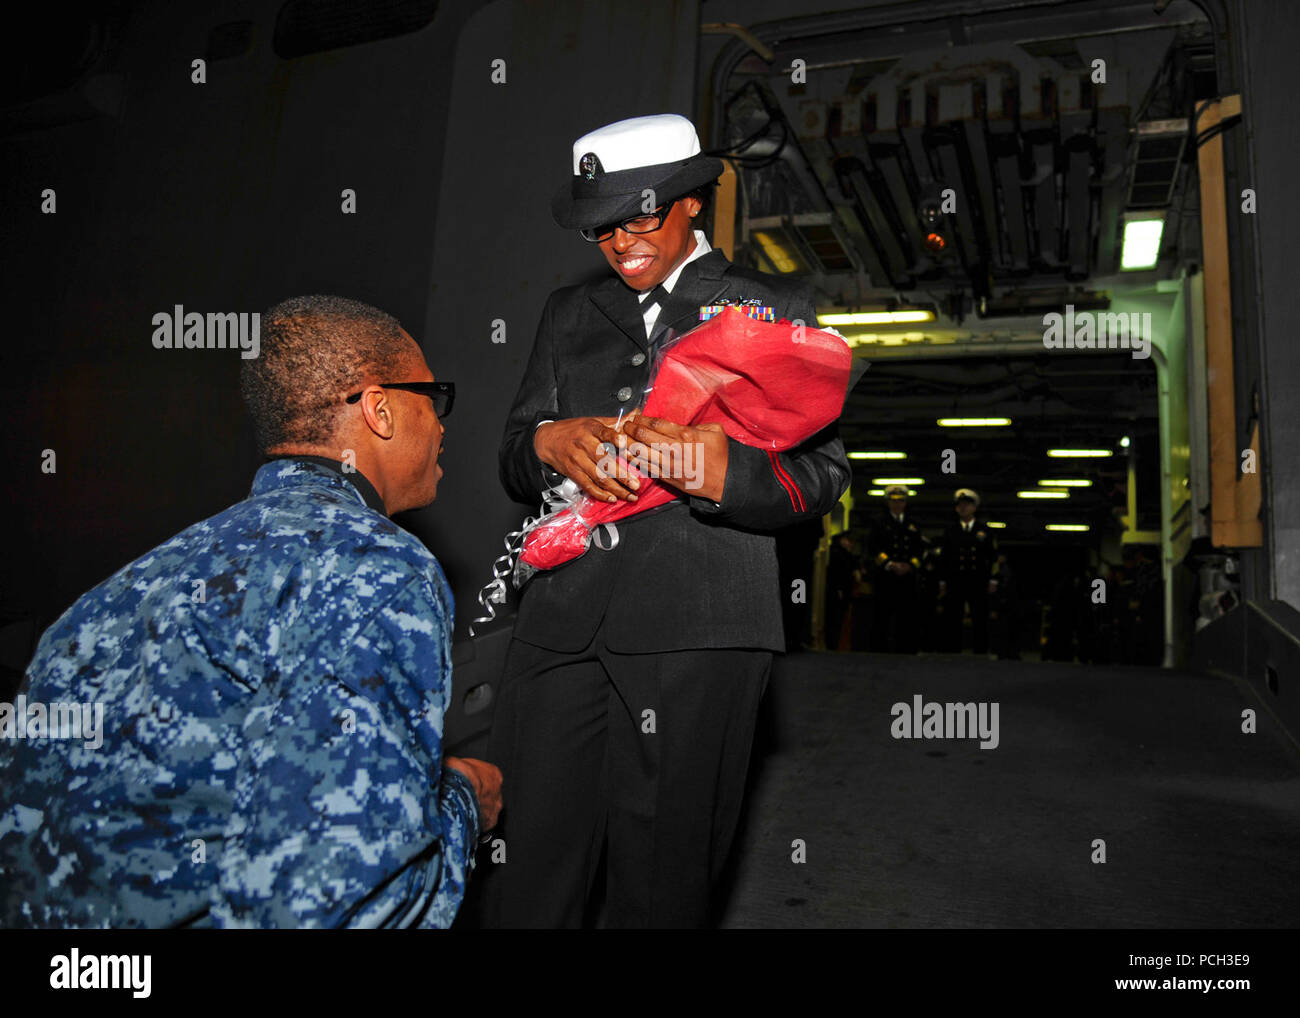 SASEBO, Japan (Dec. 3, 2012) Mineman 2nd Class Damond Daley proposes to his girlfriend Culinary Specialist 2nd Class Andrenel Frazier after a three month deployment aboard the amphibious assault ship USS Bonhomme Richard (LHD 6). Bonhomme Richard is the lead ship of the only forward-deployed amphibious ready group and is operating in the U.S. 7th Fleet area of responsibility. Stock Photo